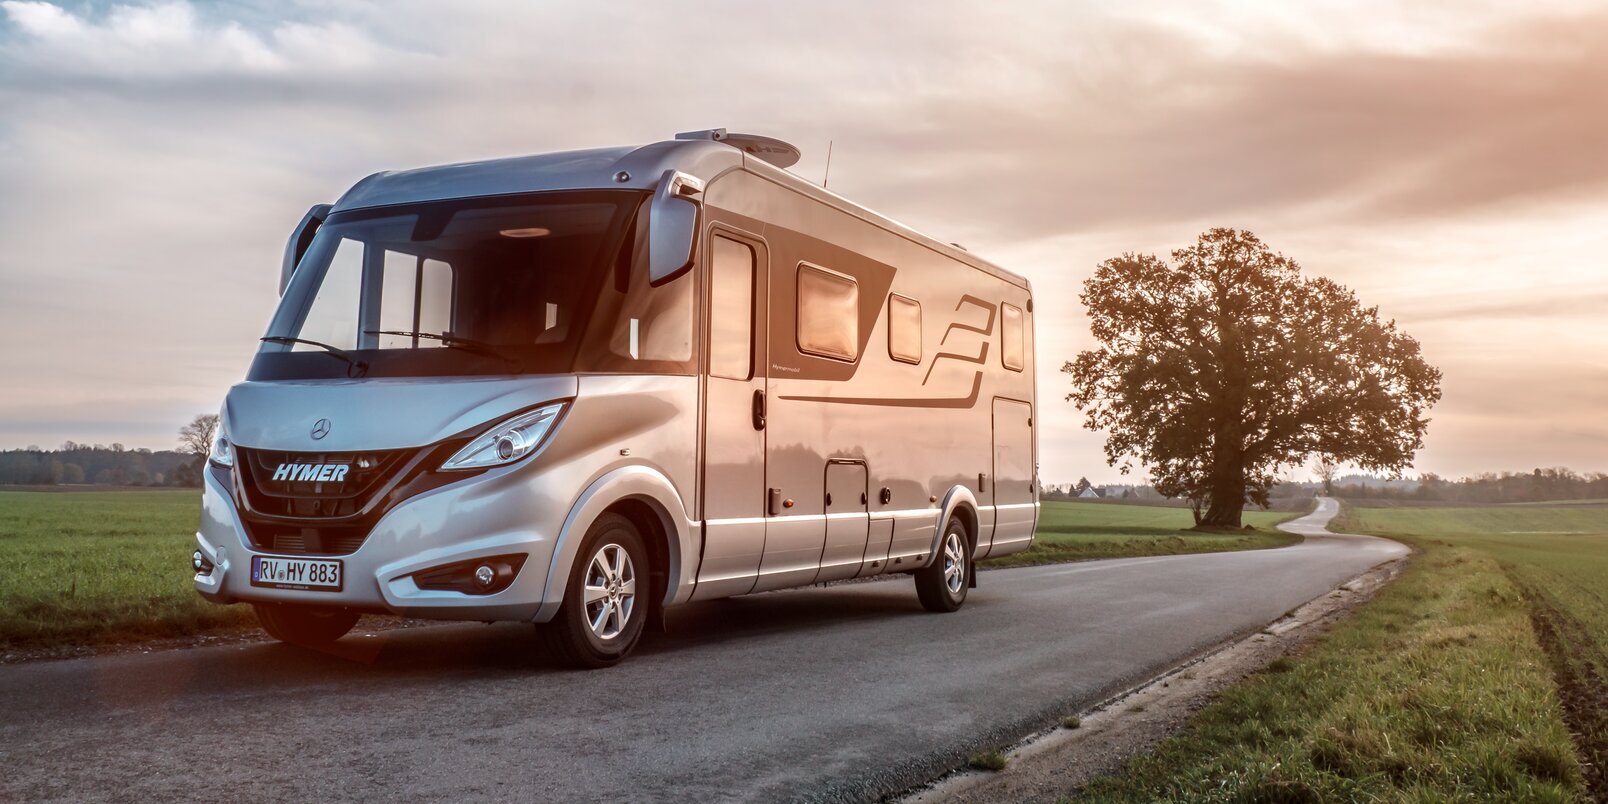 HYMER B-Class Masterline on the road in a flat landscape with green meadows and trees